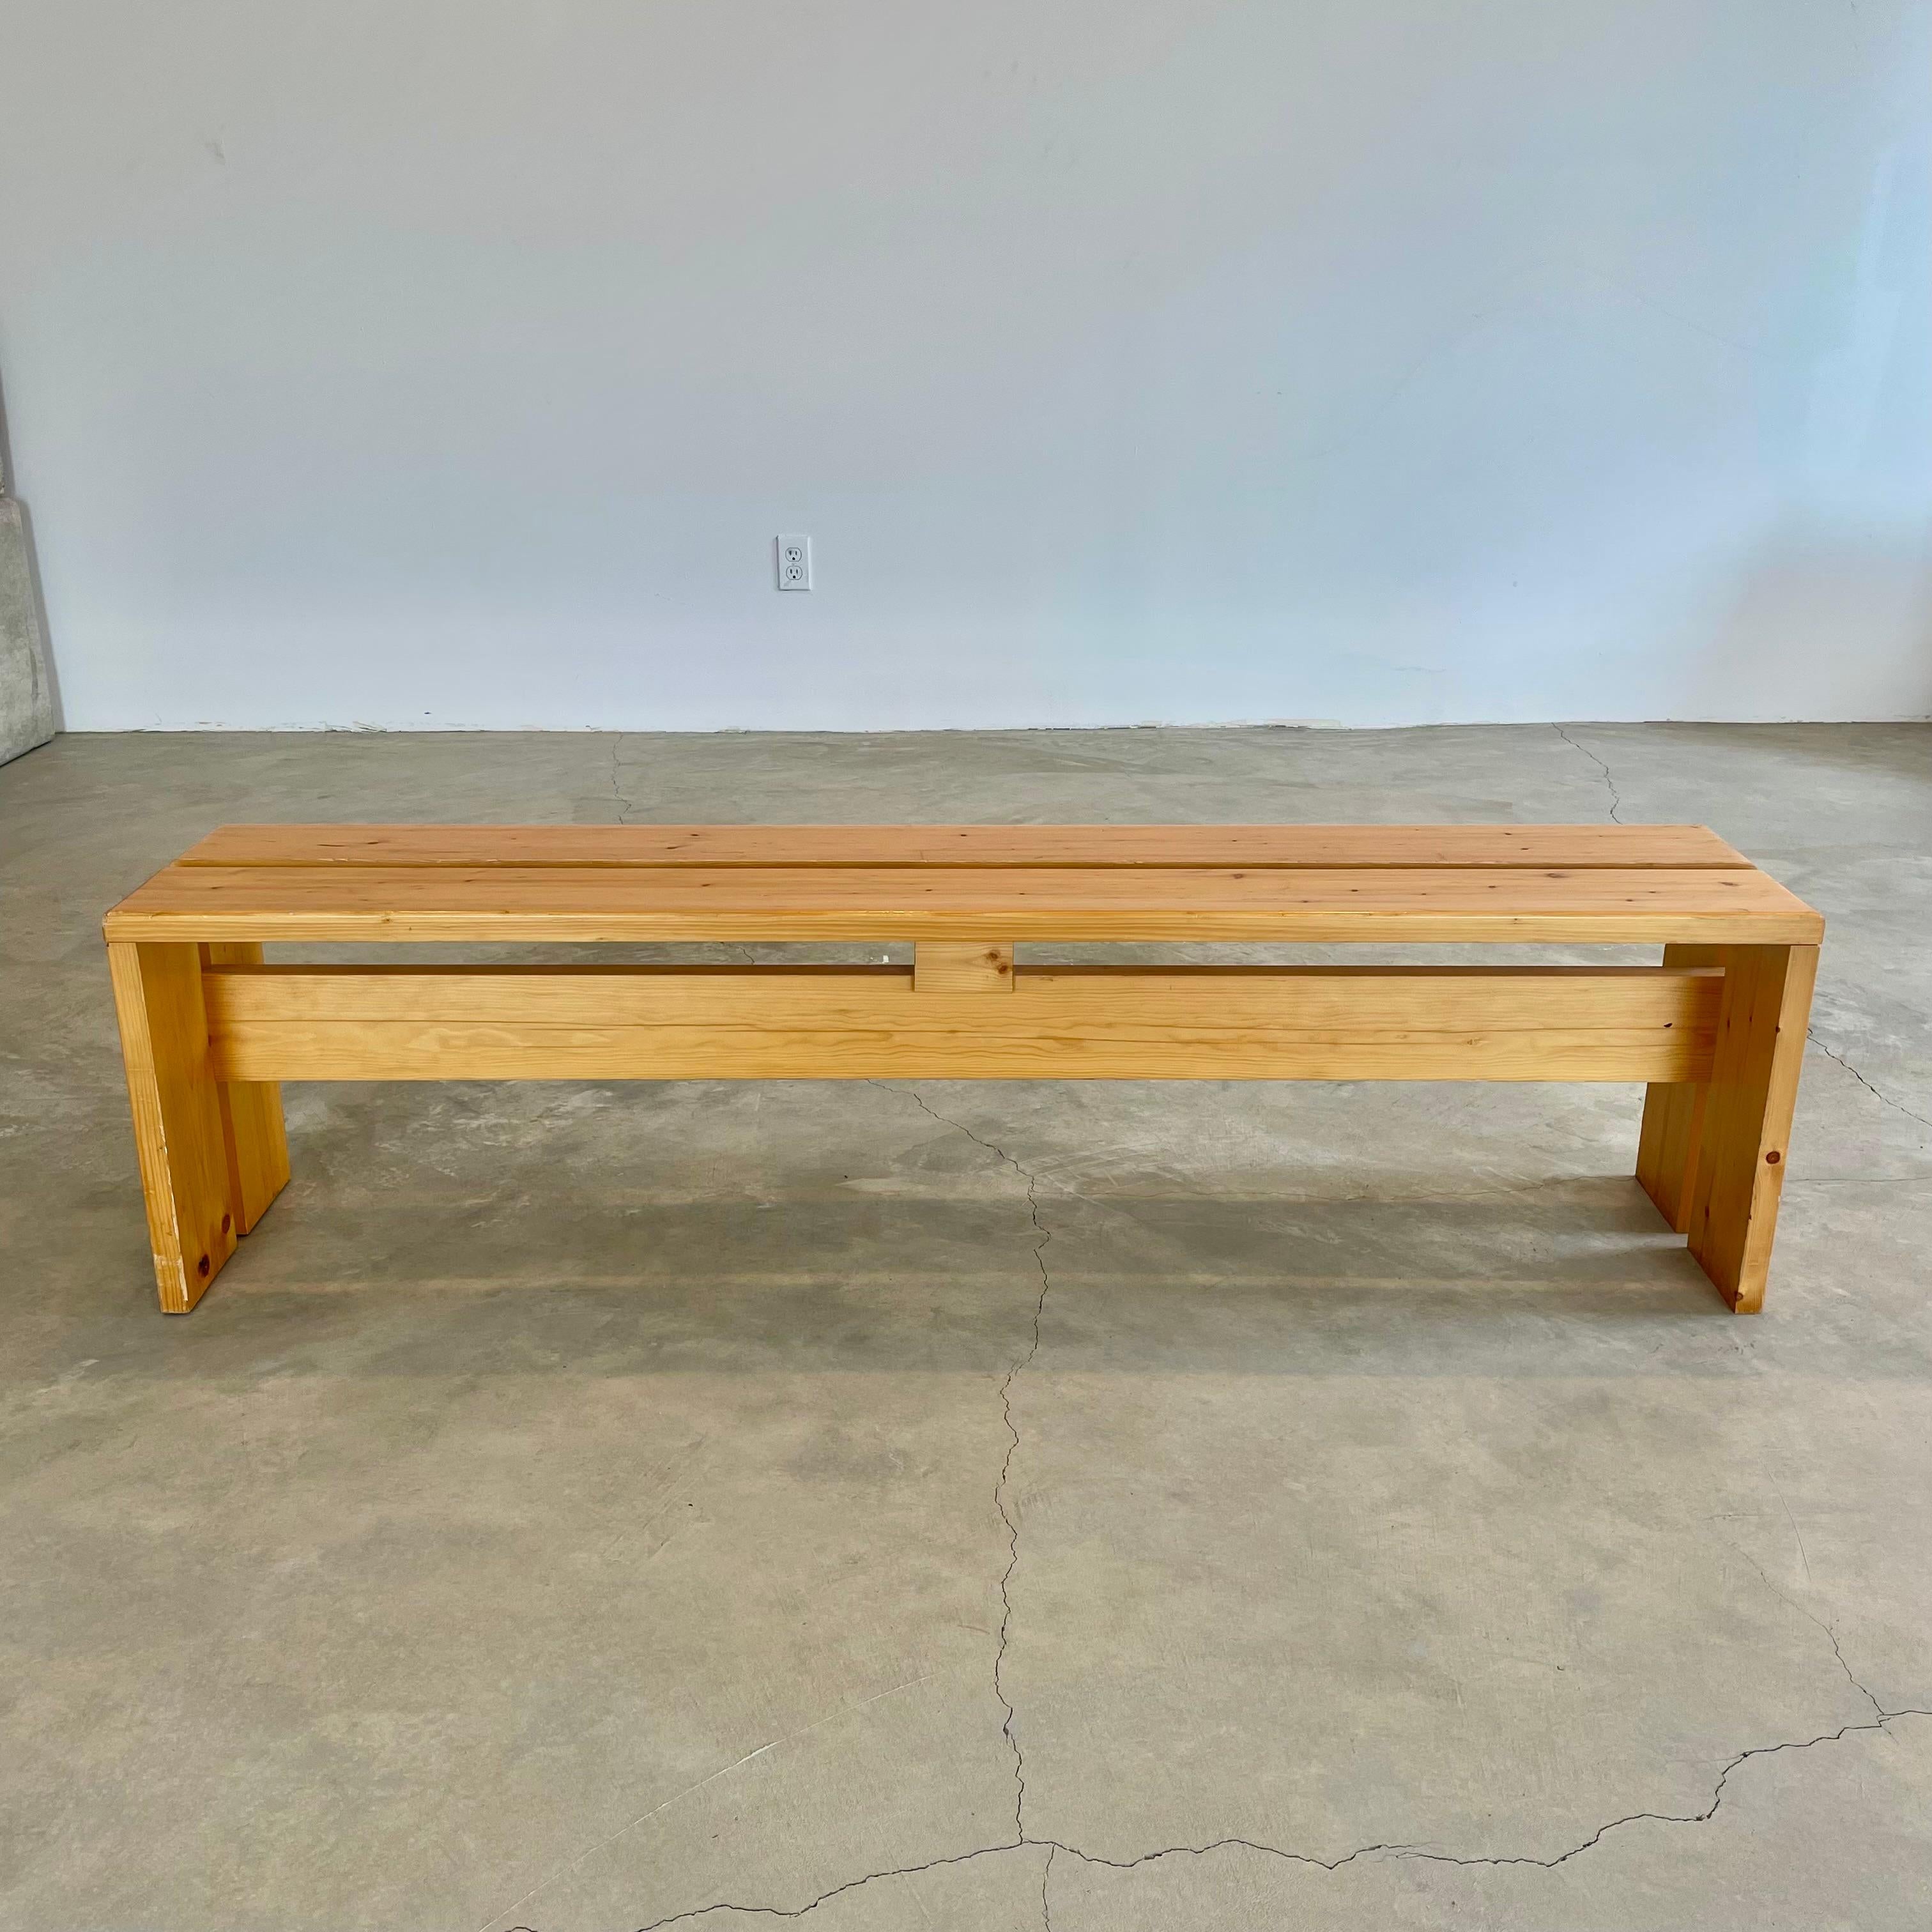 Classic pine 4 seater bench designed by Charlotte Perriand for the Les Arcs Ski Resort in France. A beautiful example of iconic Perriand design in an amazingly unusual length stretching 5.25 feet long. Pine was the wood of choice for much of the